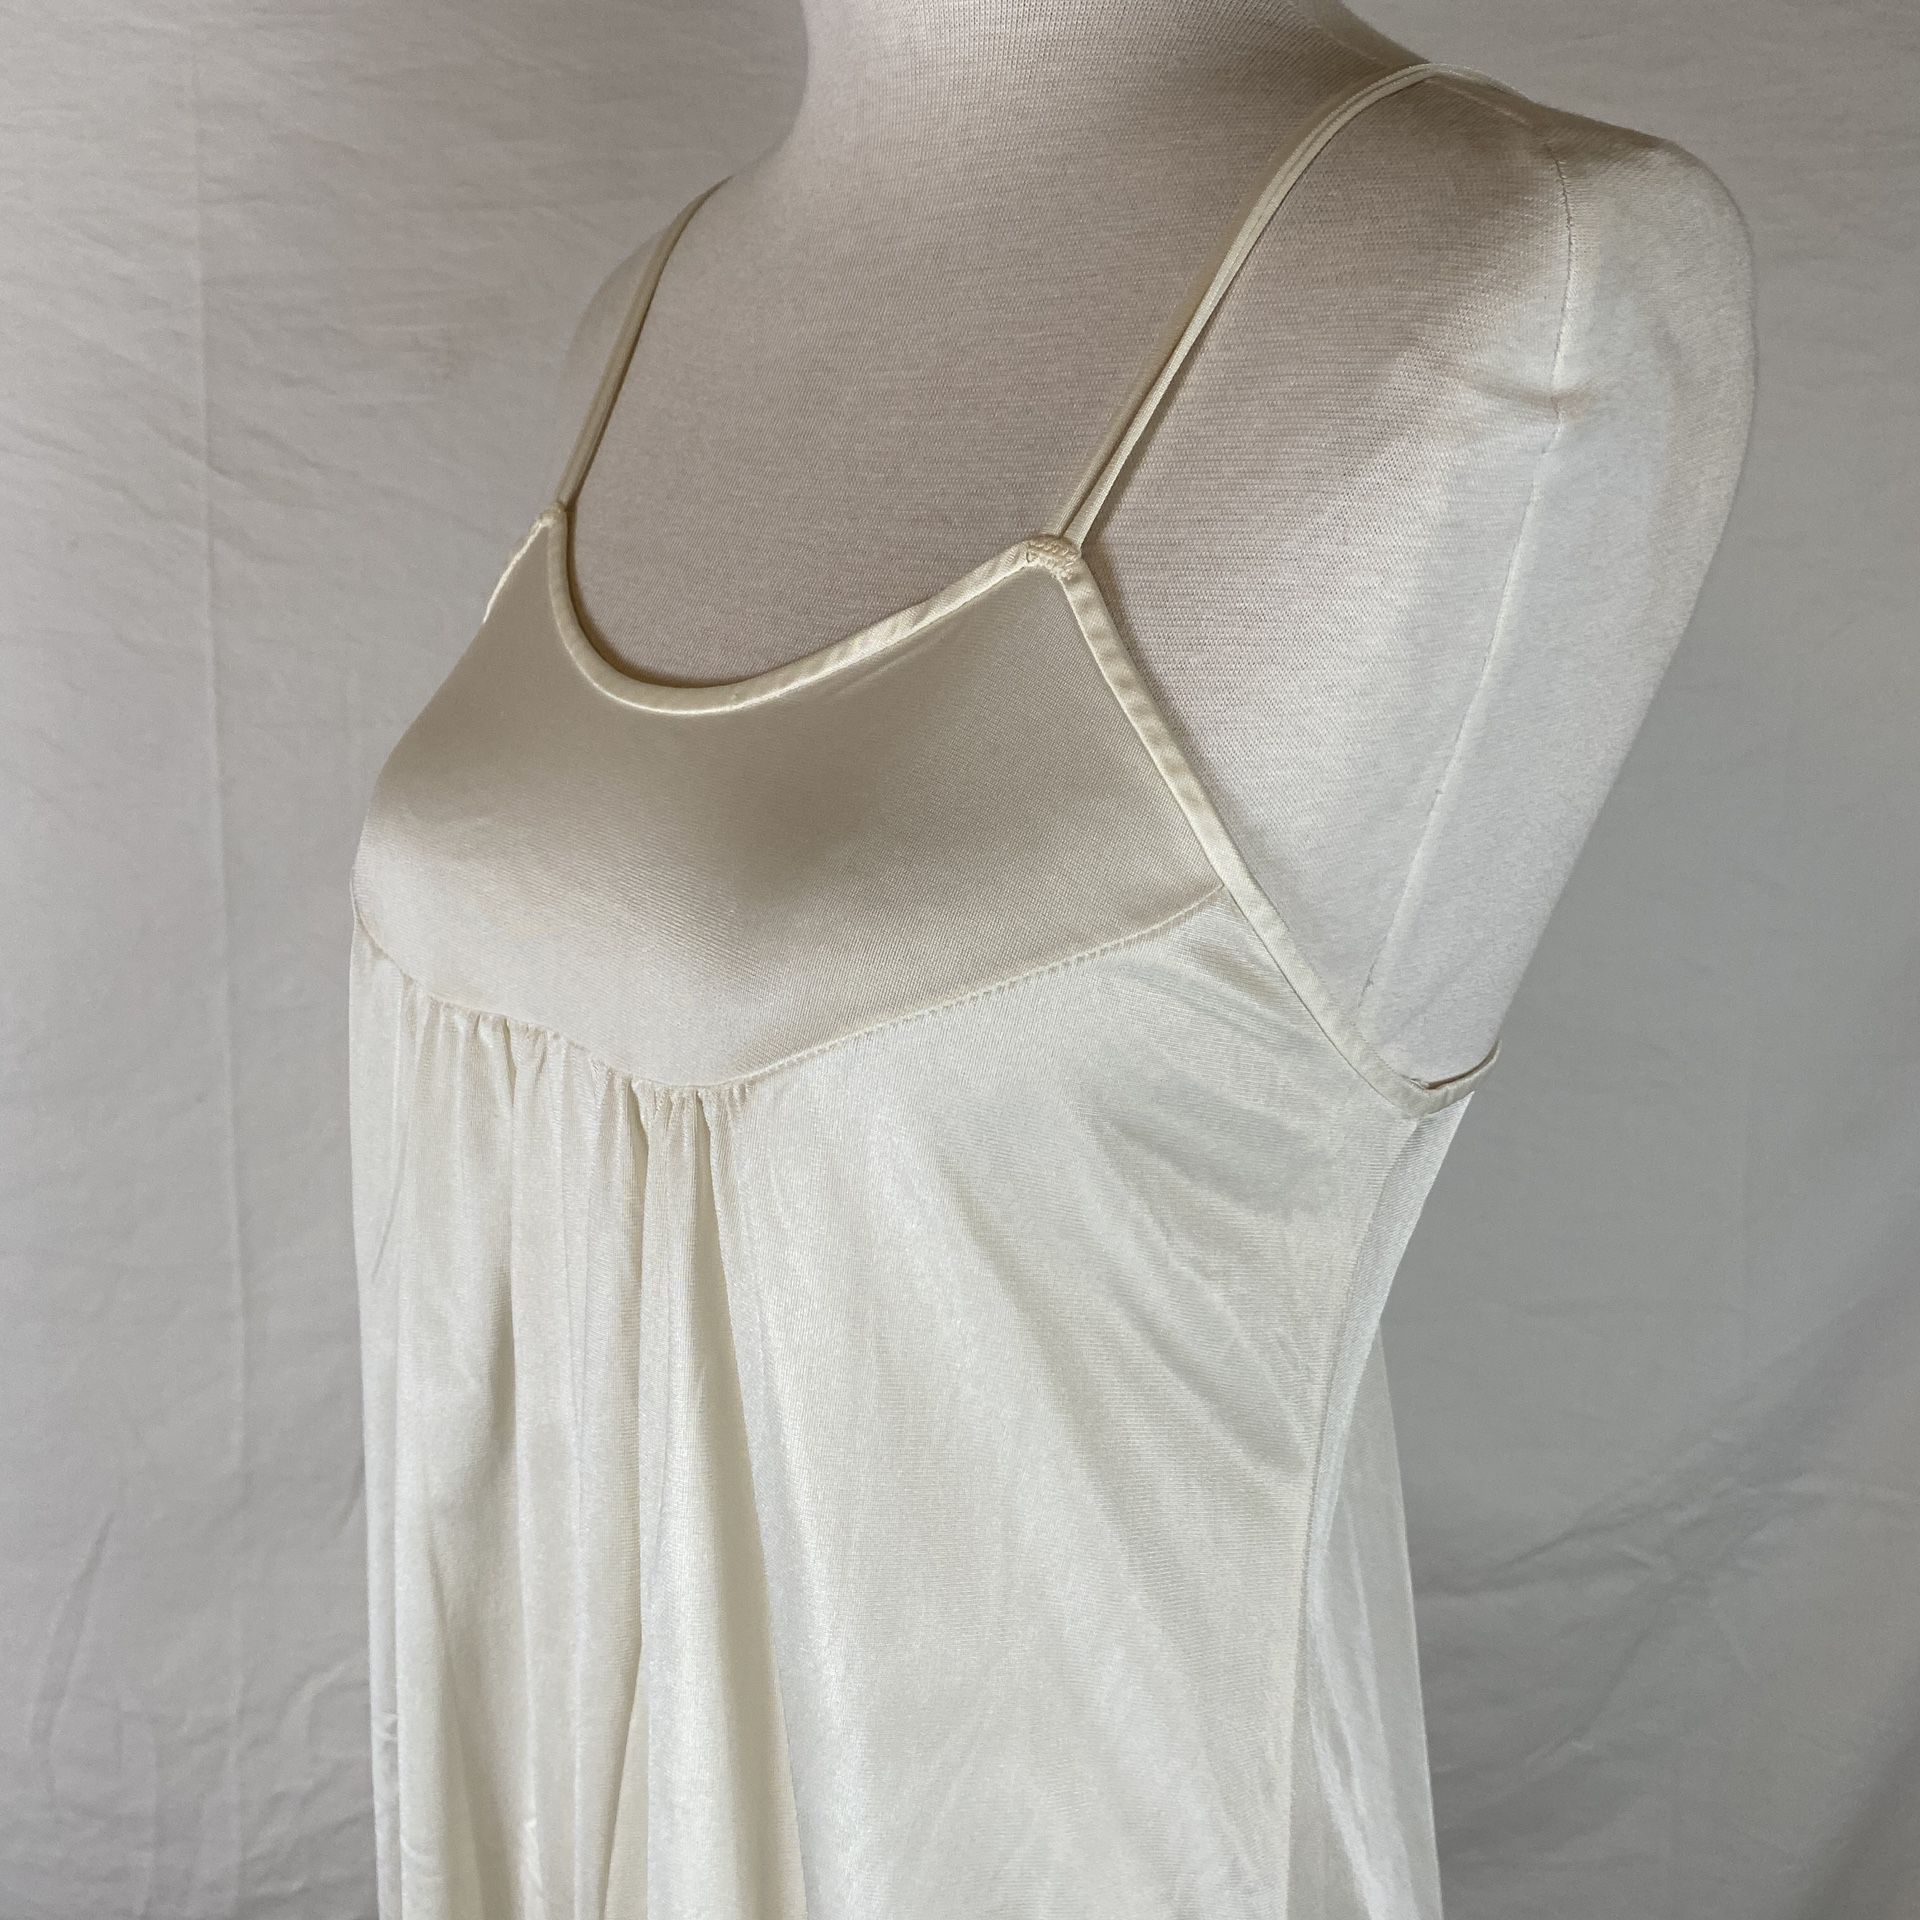 Vintage 70s Montgomery Ward Slip Nightgown Dress Floral Lace USA Made Sz S